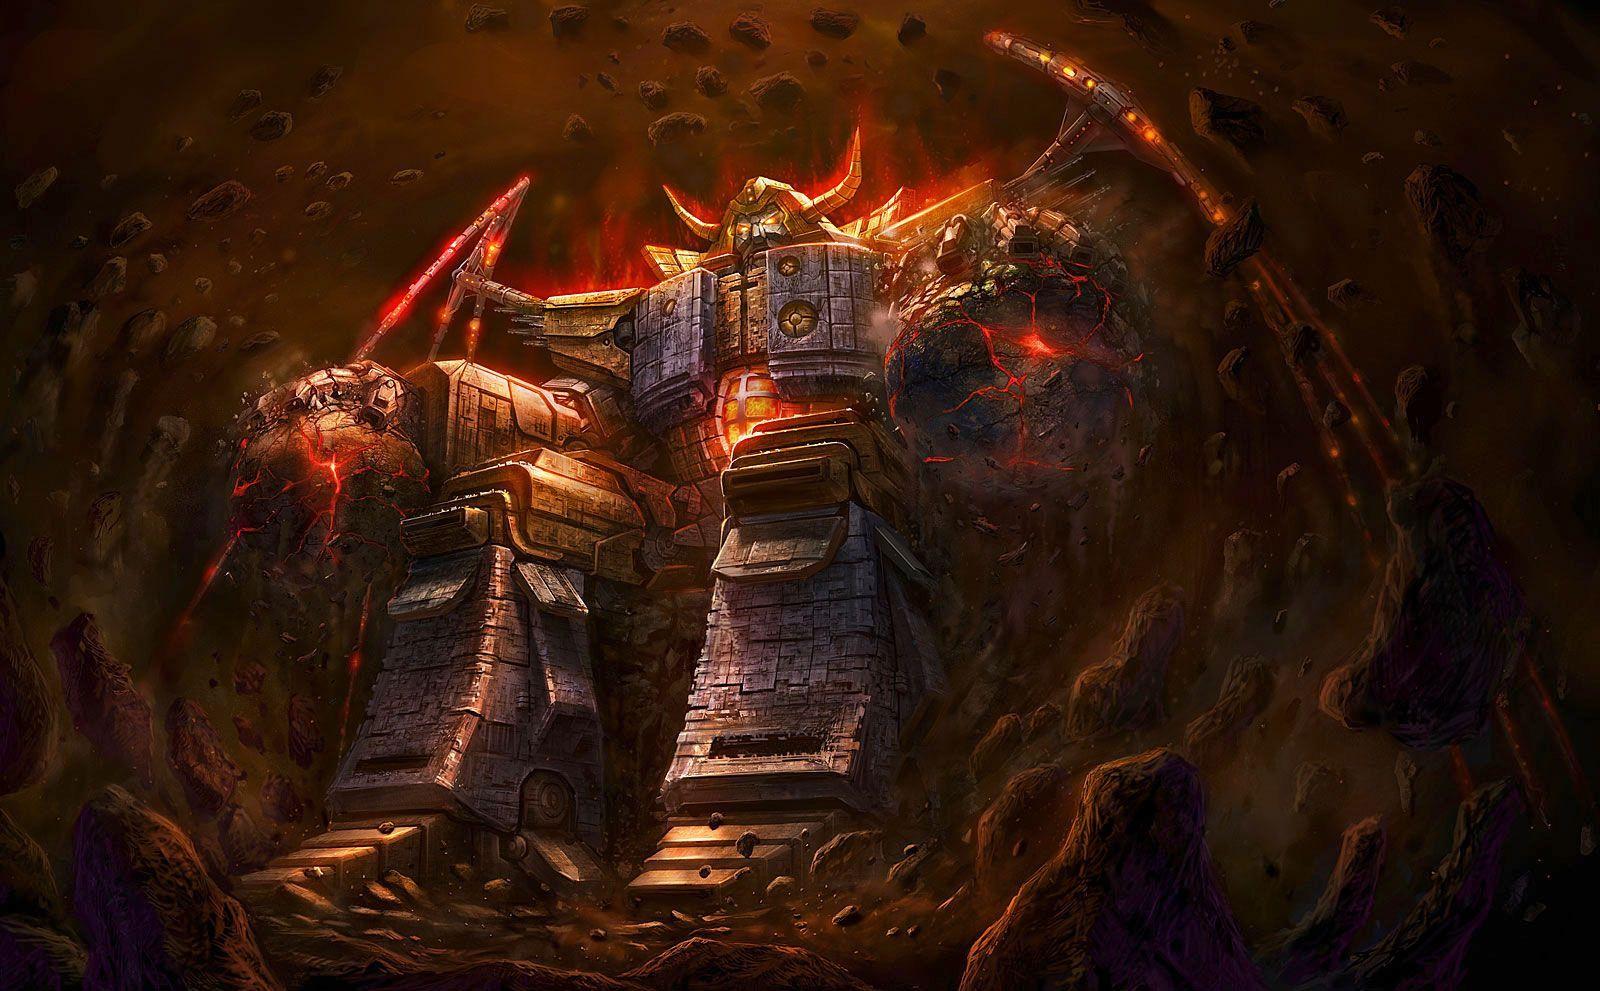 image For > Transformers Unicron Movie. coolest trans formers